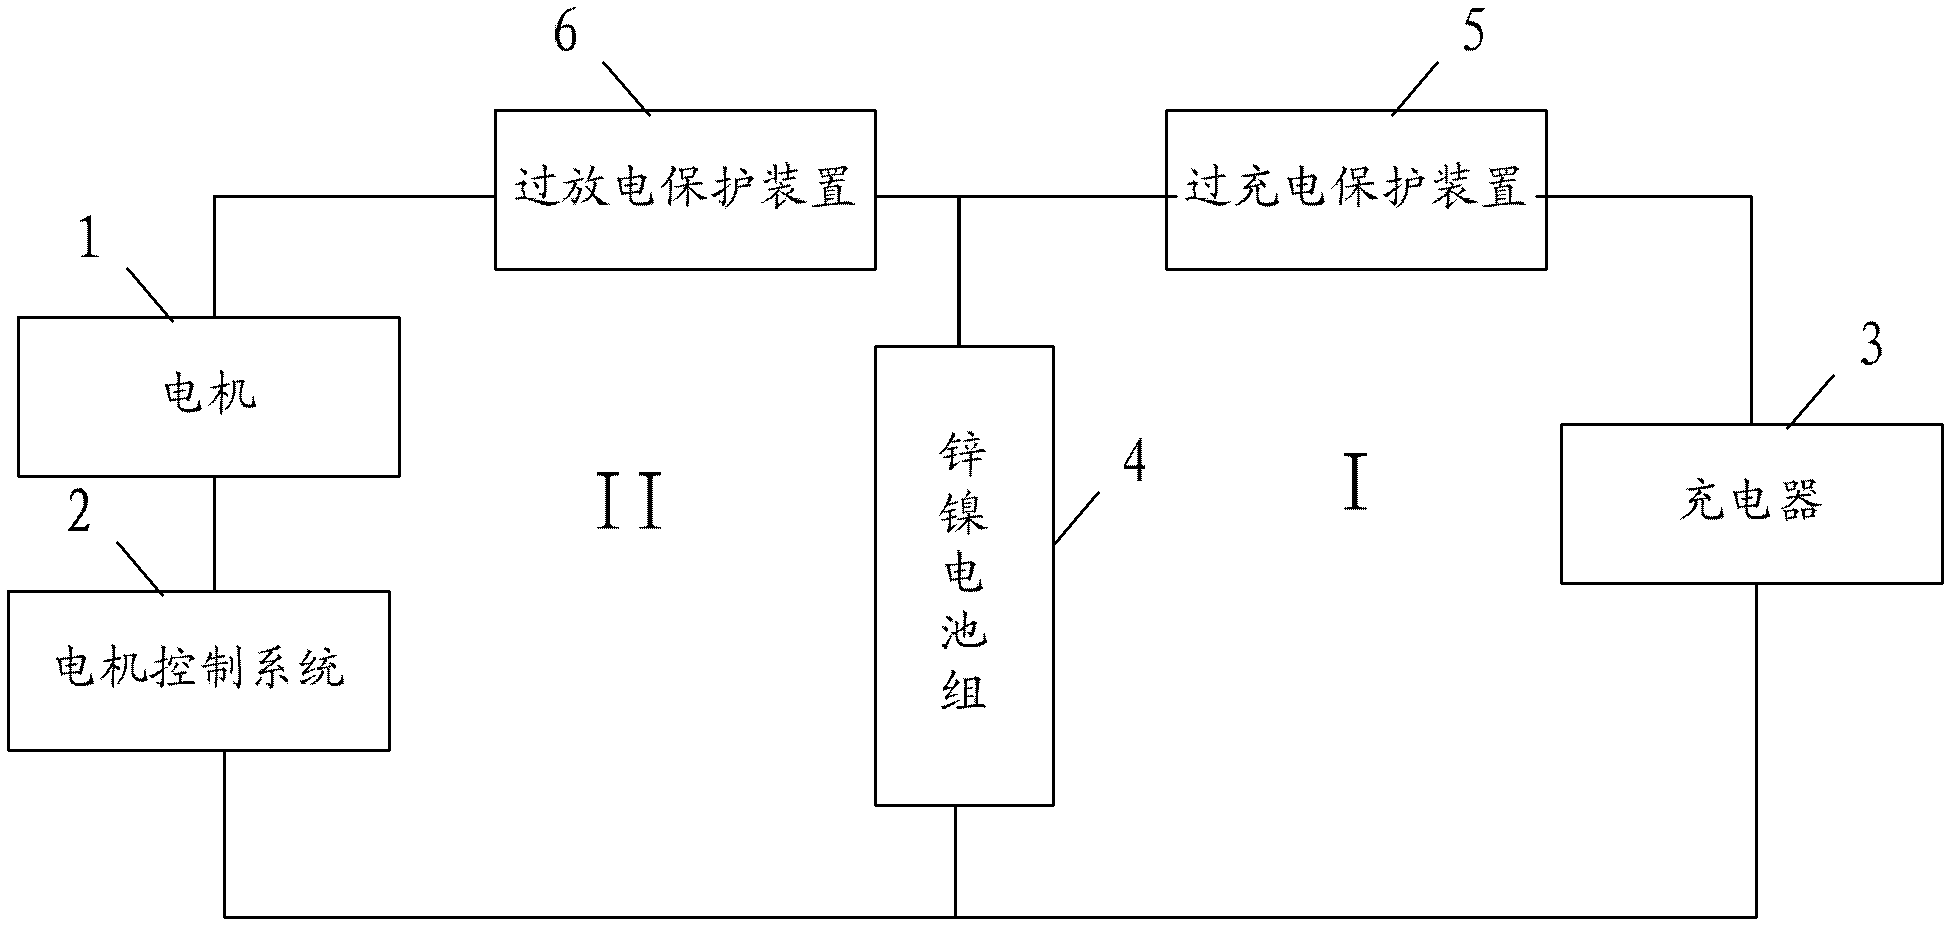 Power system for electrombile